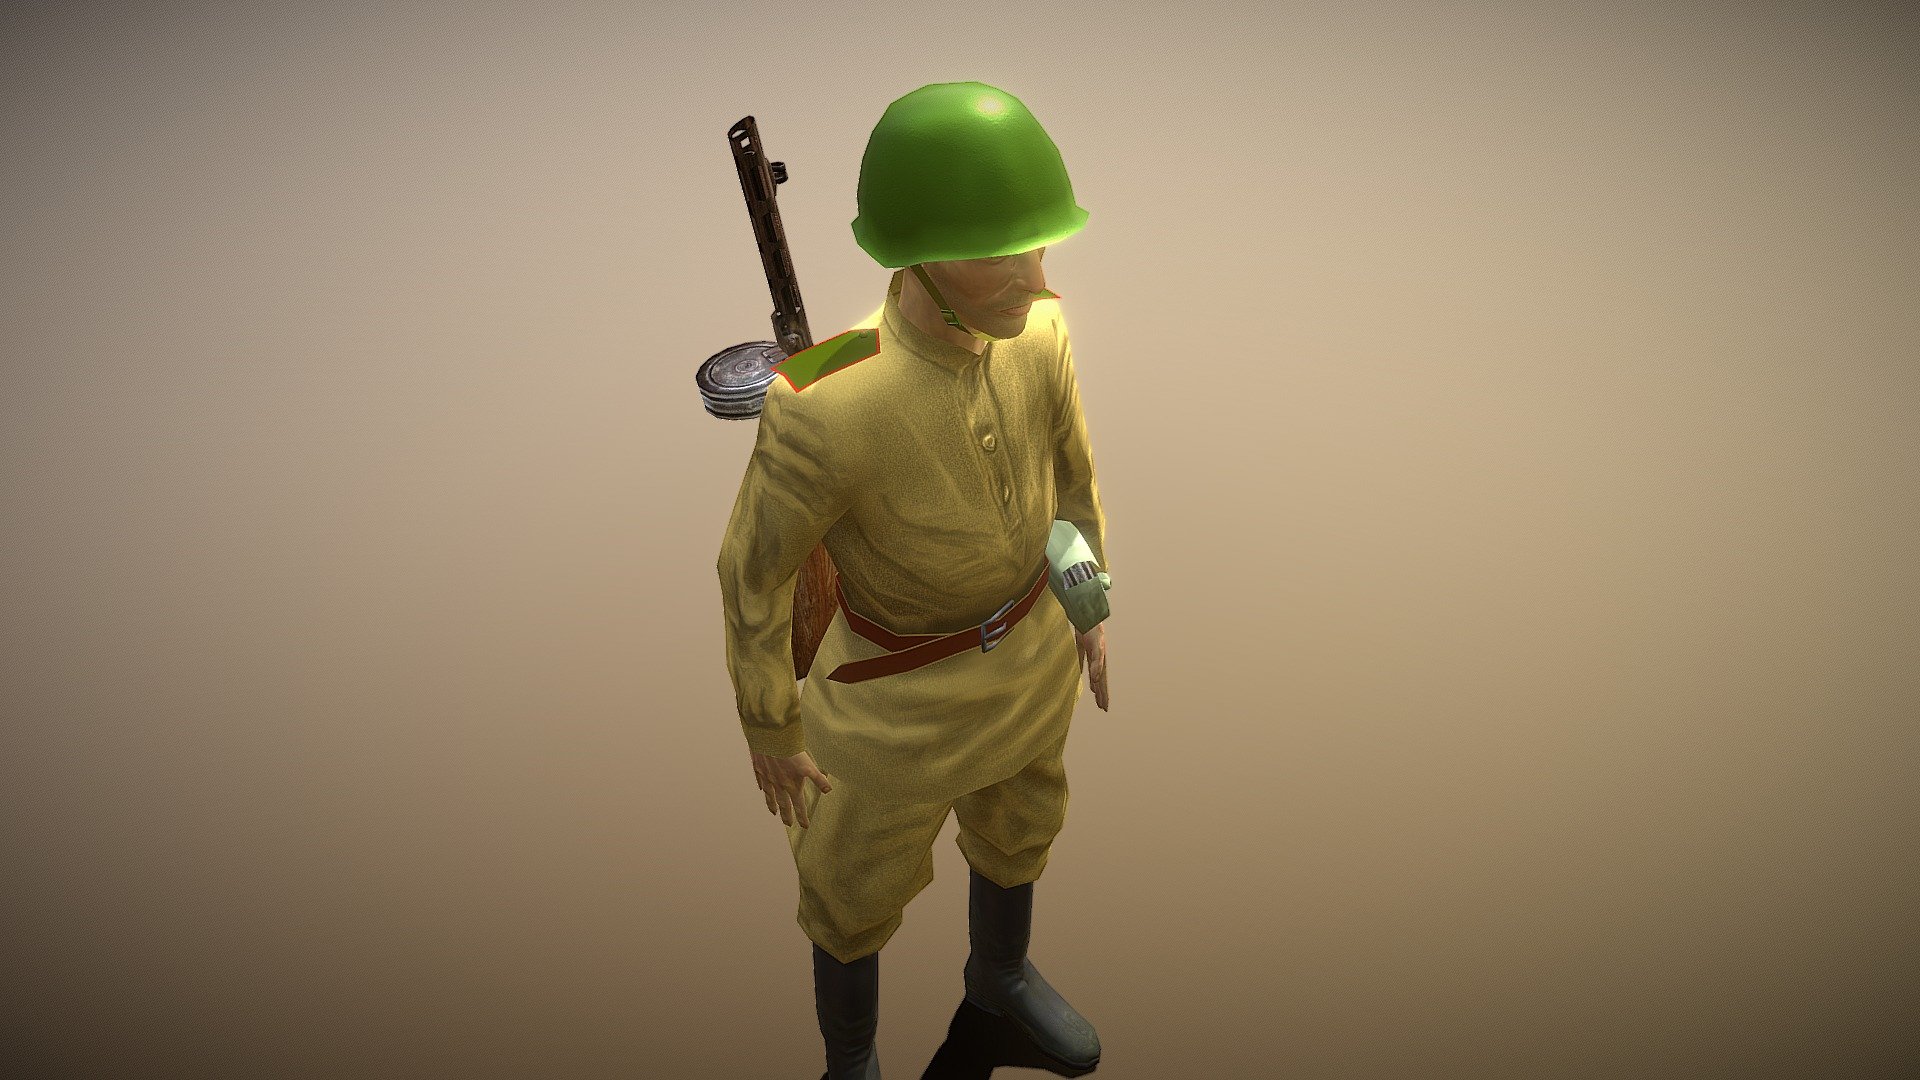 Red Army soldier